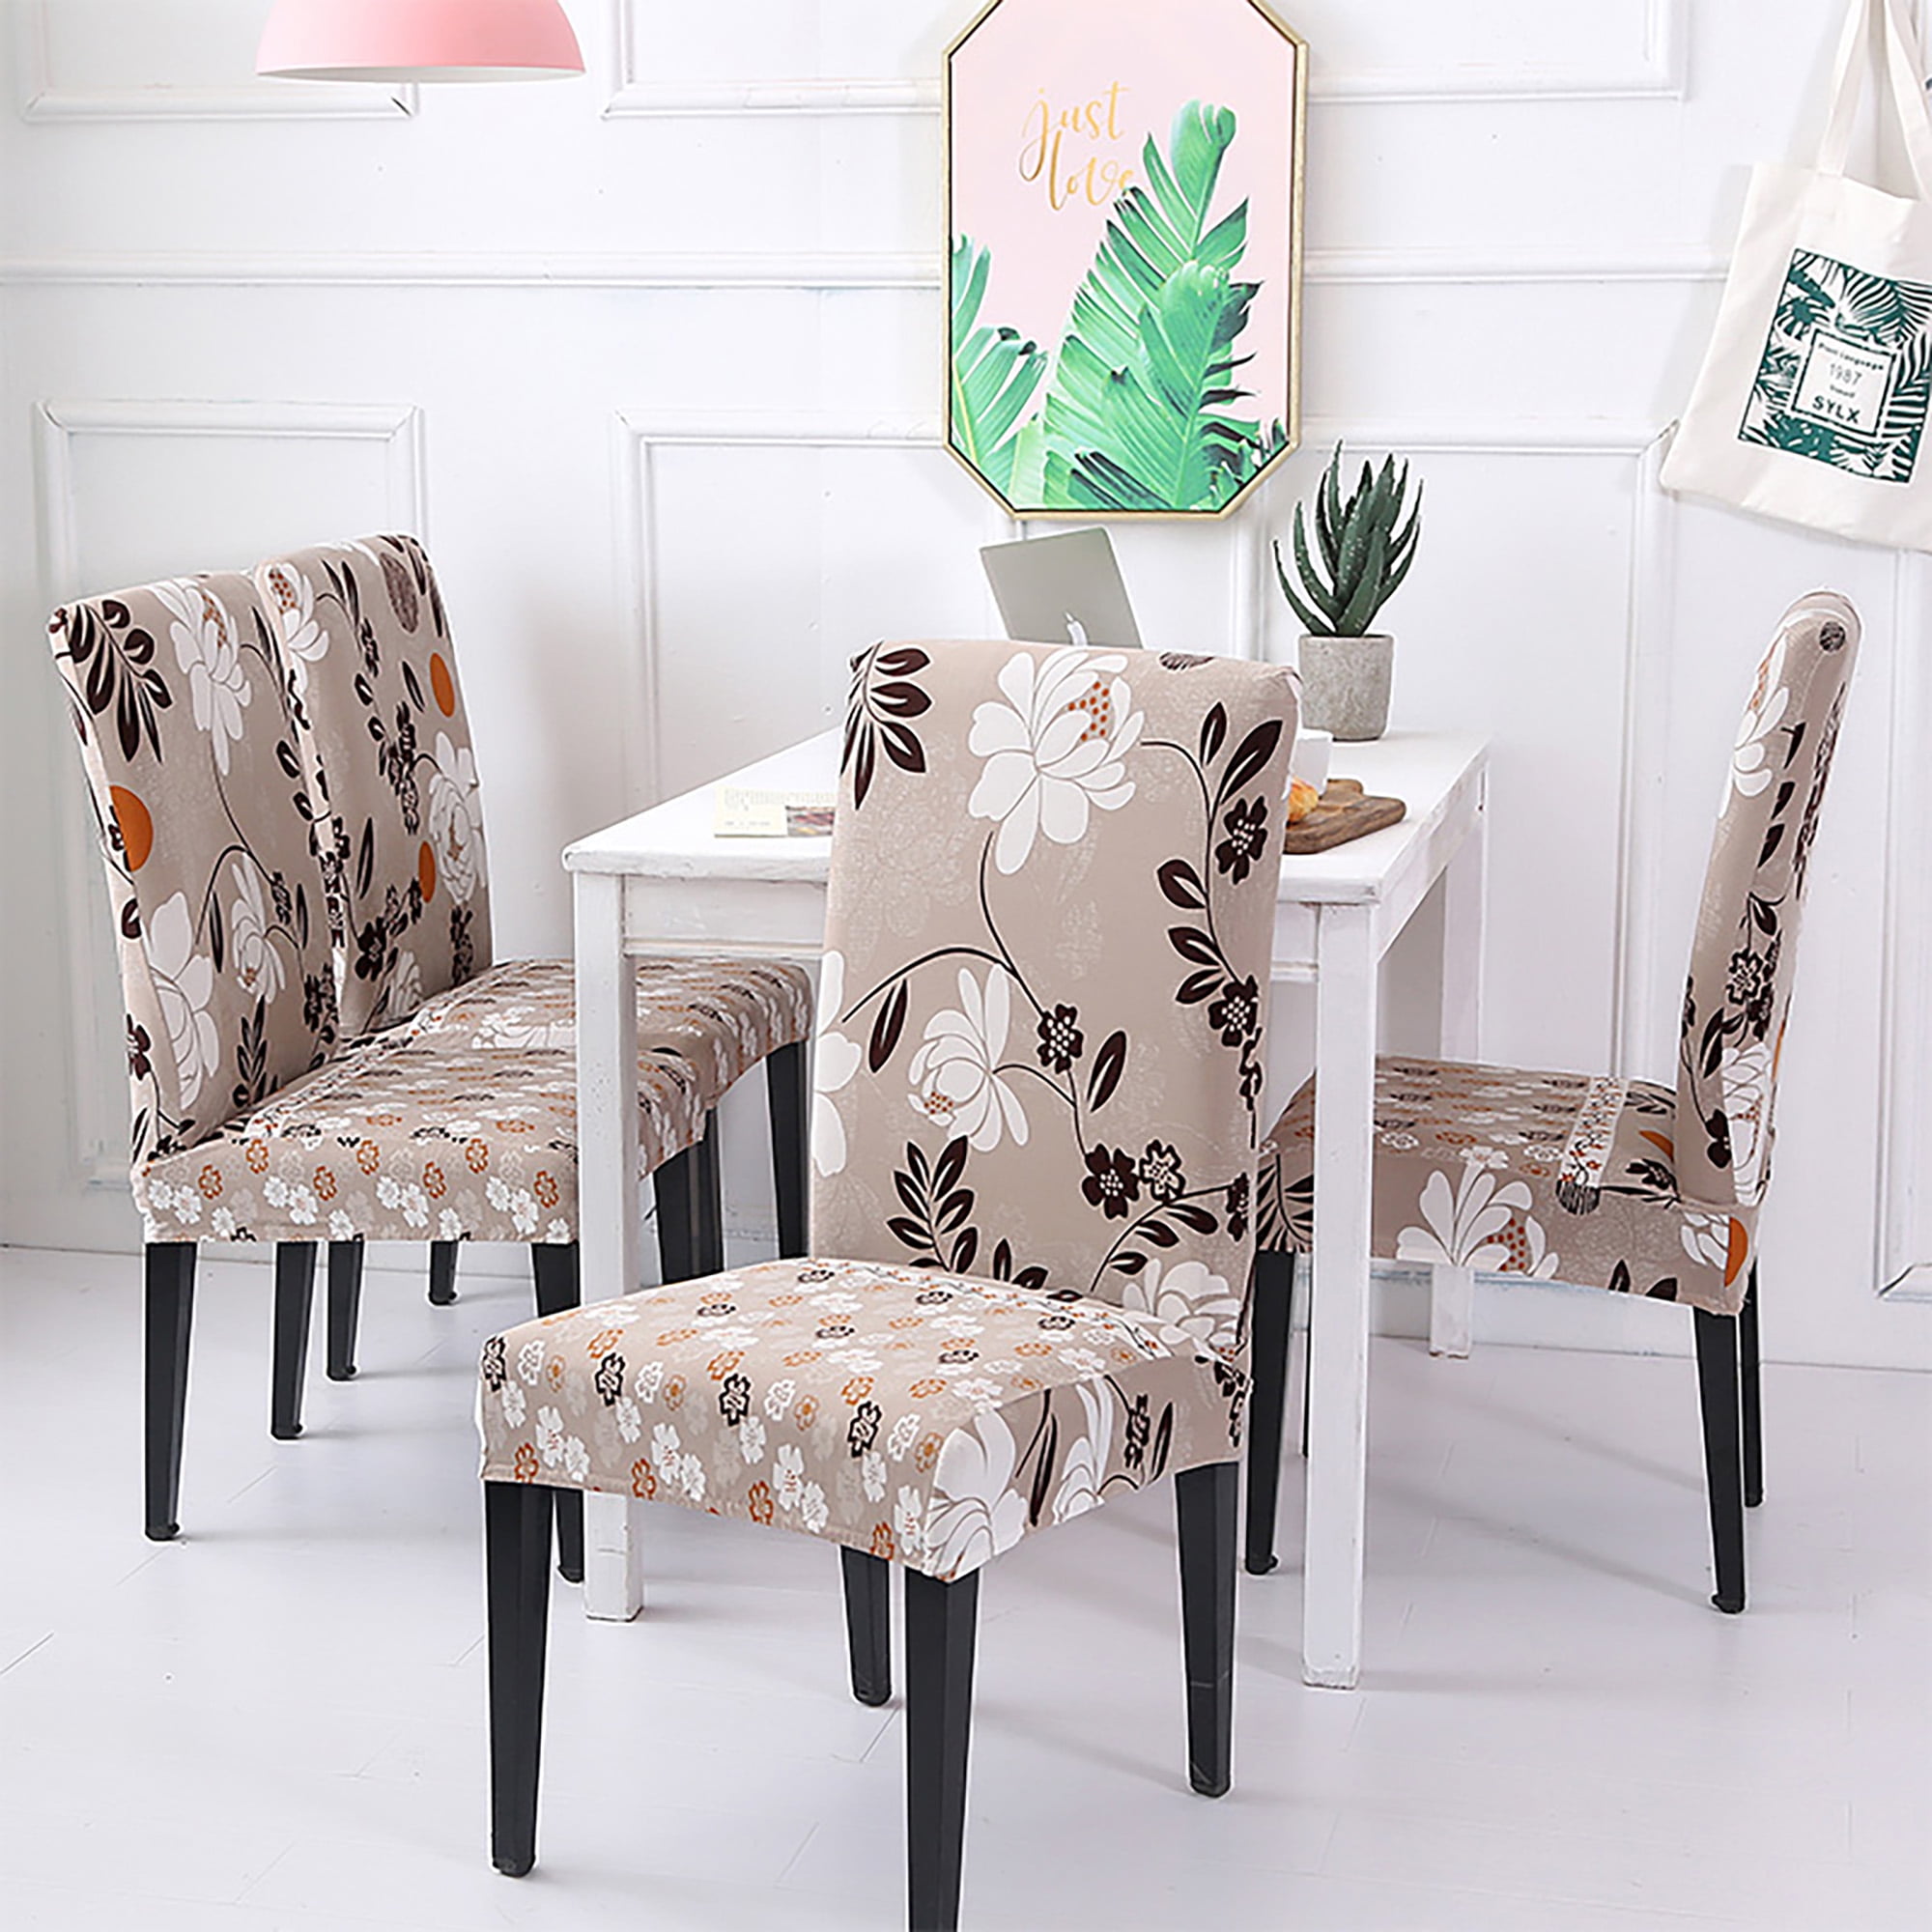 Dining Room Banquet Venue Chair Cover Stretch Seat Slipcover Protector Decor 1Pc 